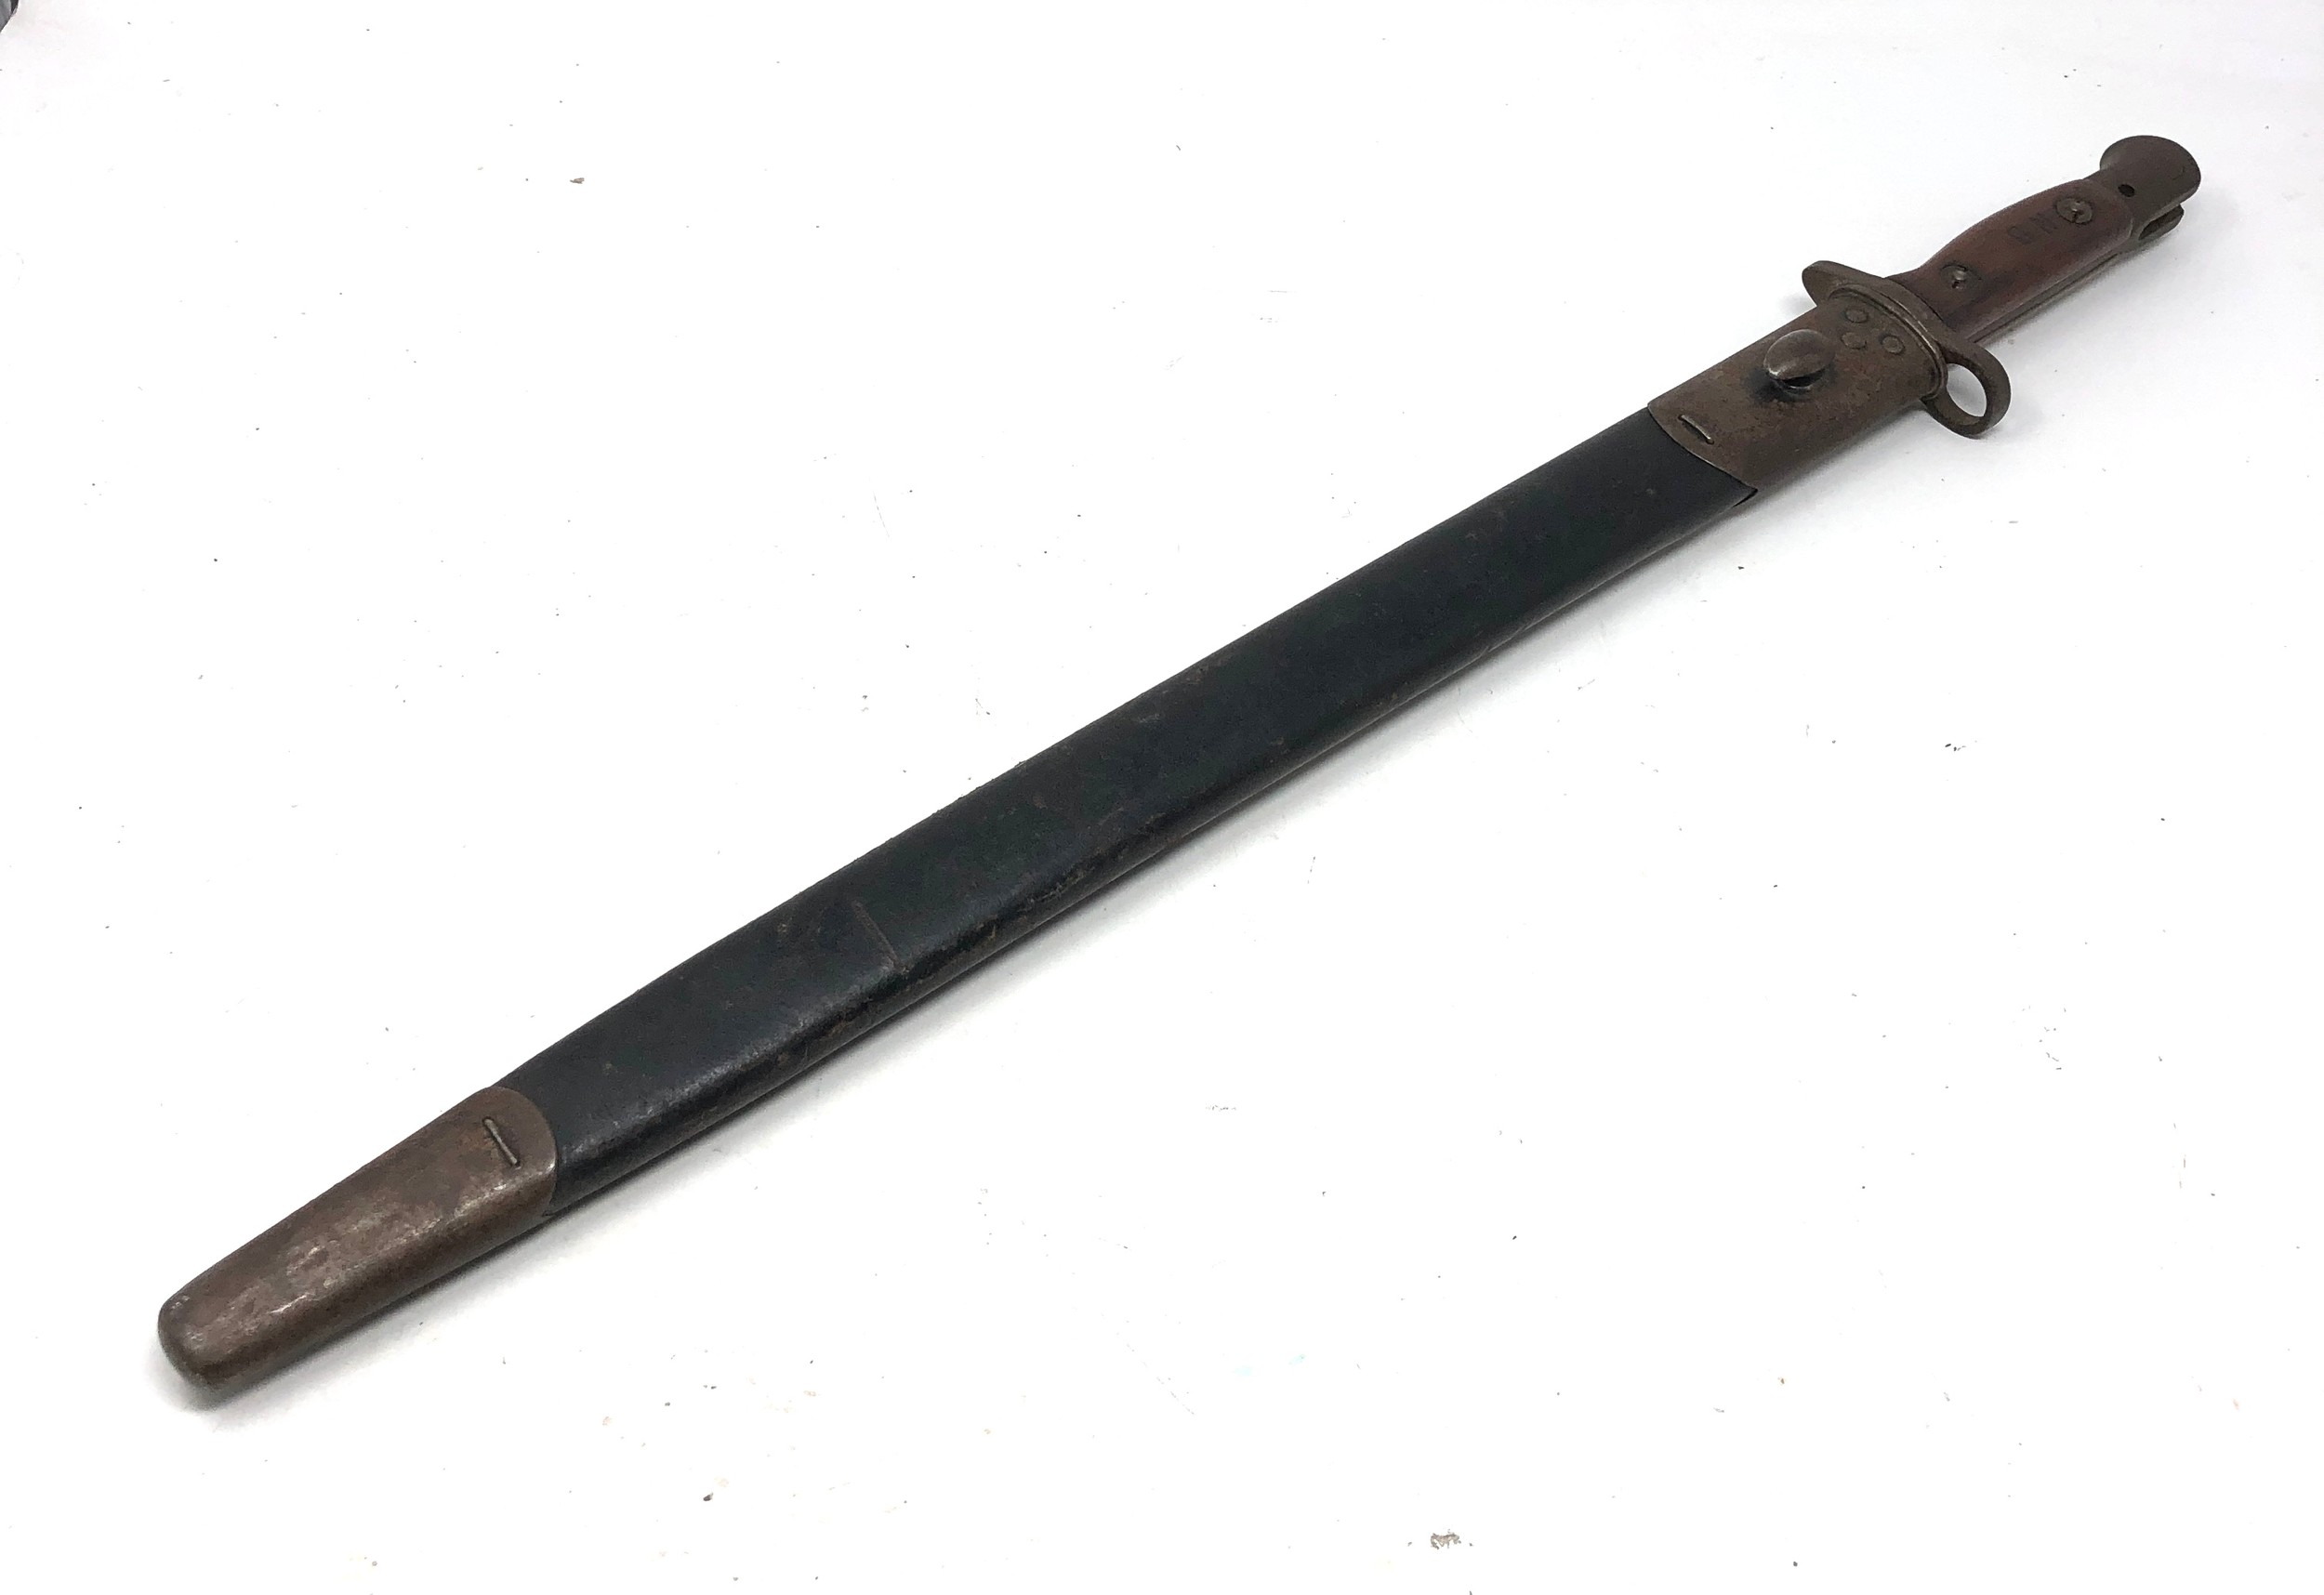 1907 sanderson bayonet and scabbard - Image 2 of 6